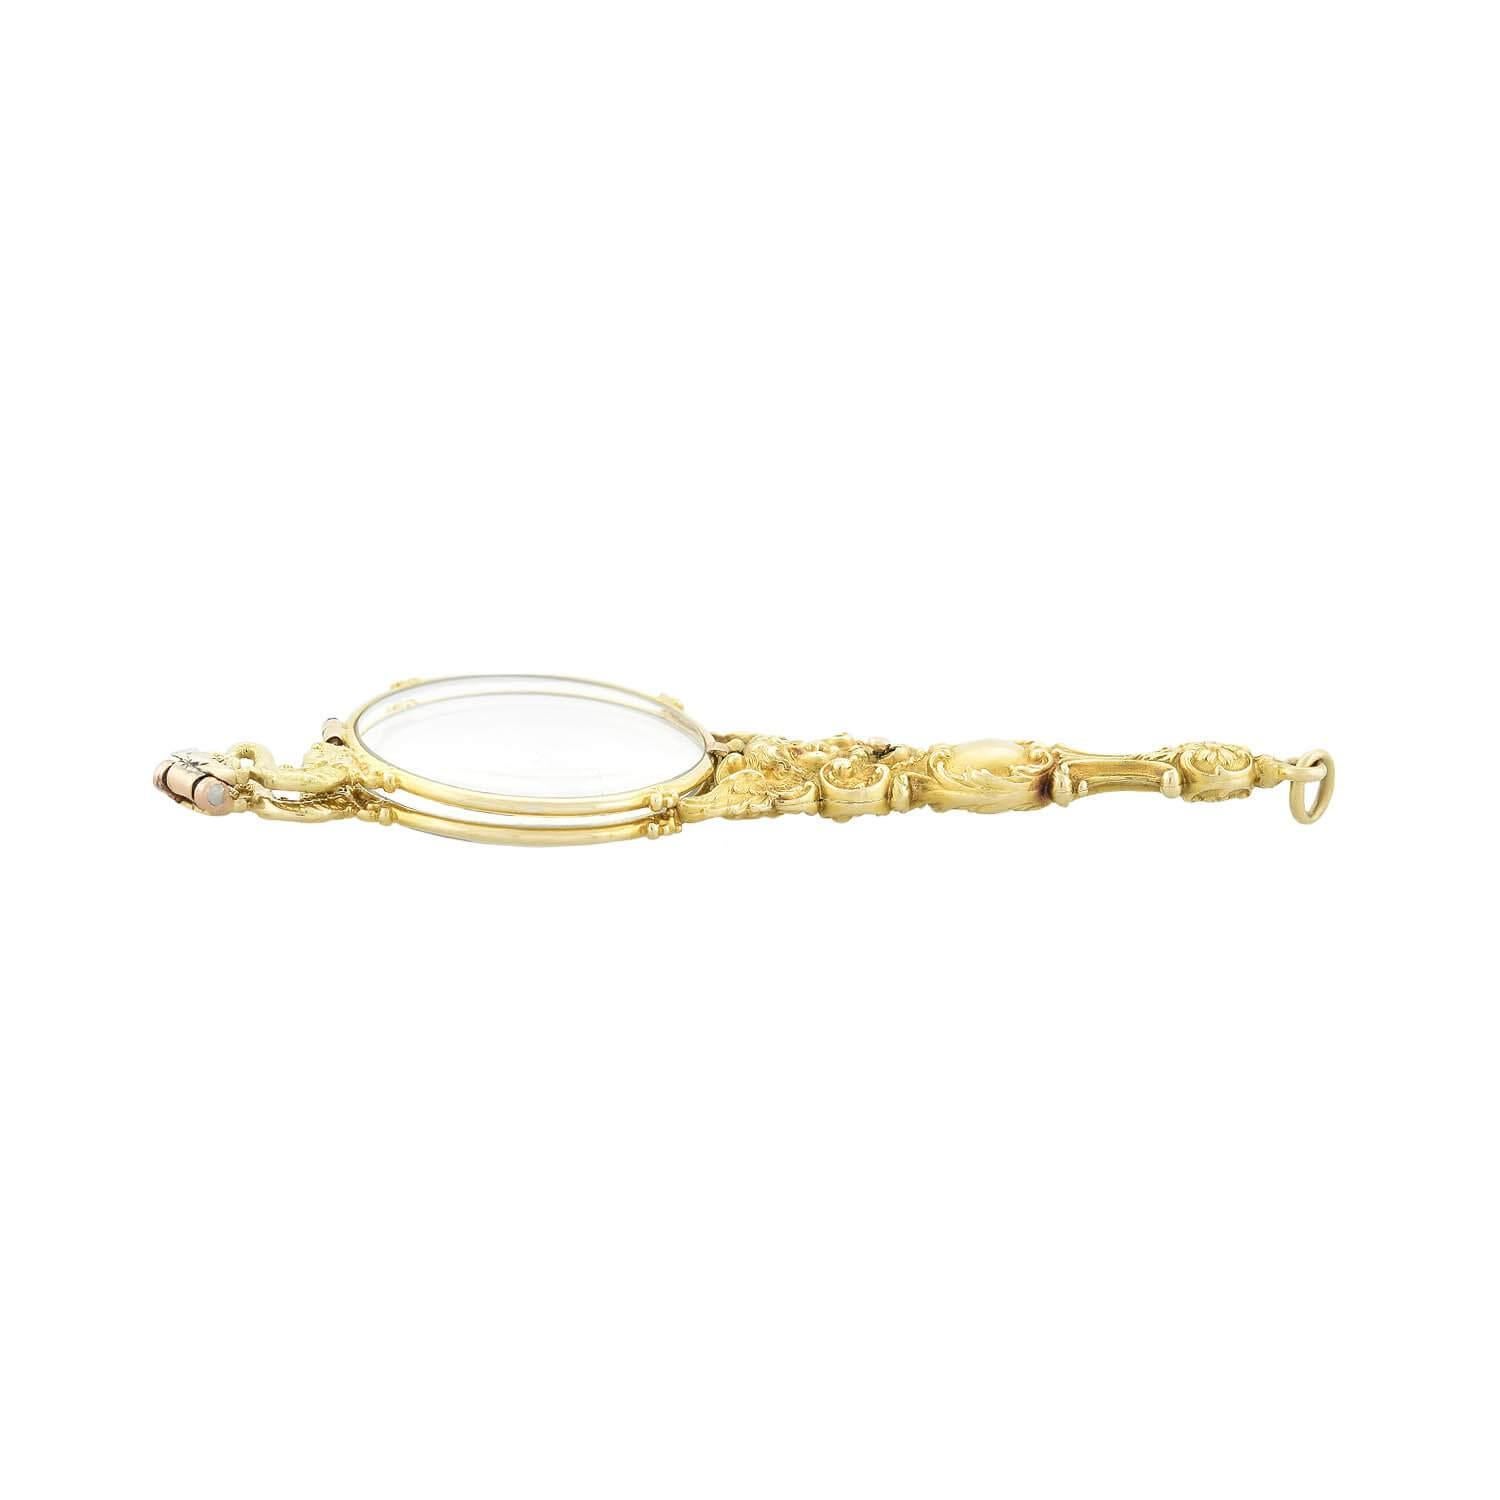 A spectacular lorgnette from the Art Nouveau (ca1900) period! Crafted in 14kt yellow gold, the piece consists of a pair of folding glasses encased in a breathtaking repousse lorgnette setting. The front and the back of the lorgnette are detailed